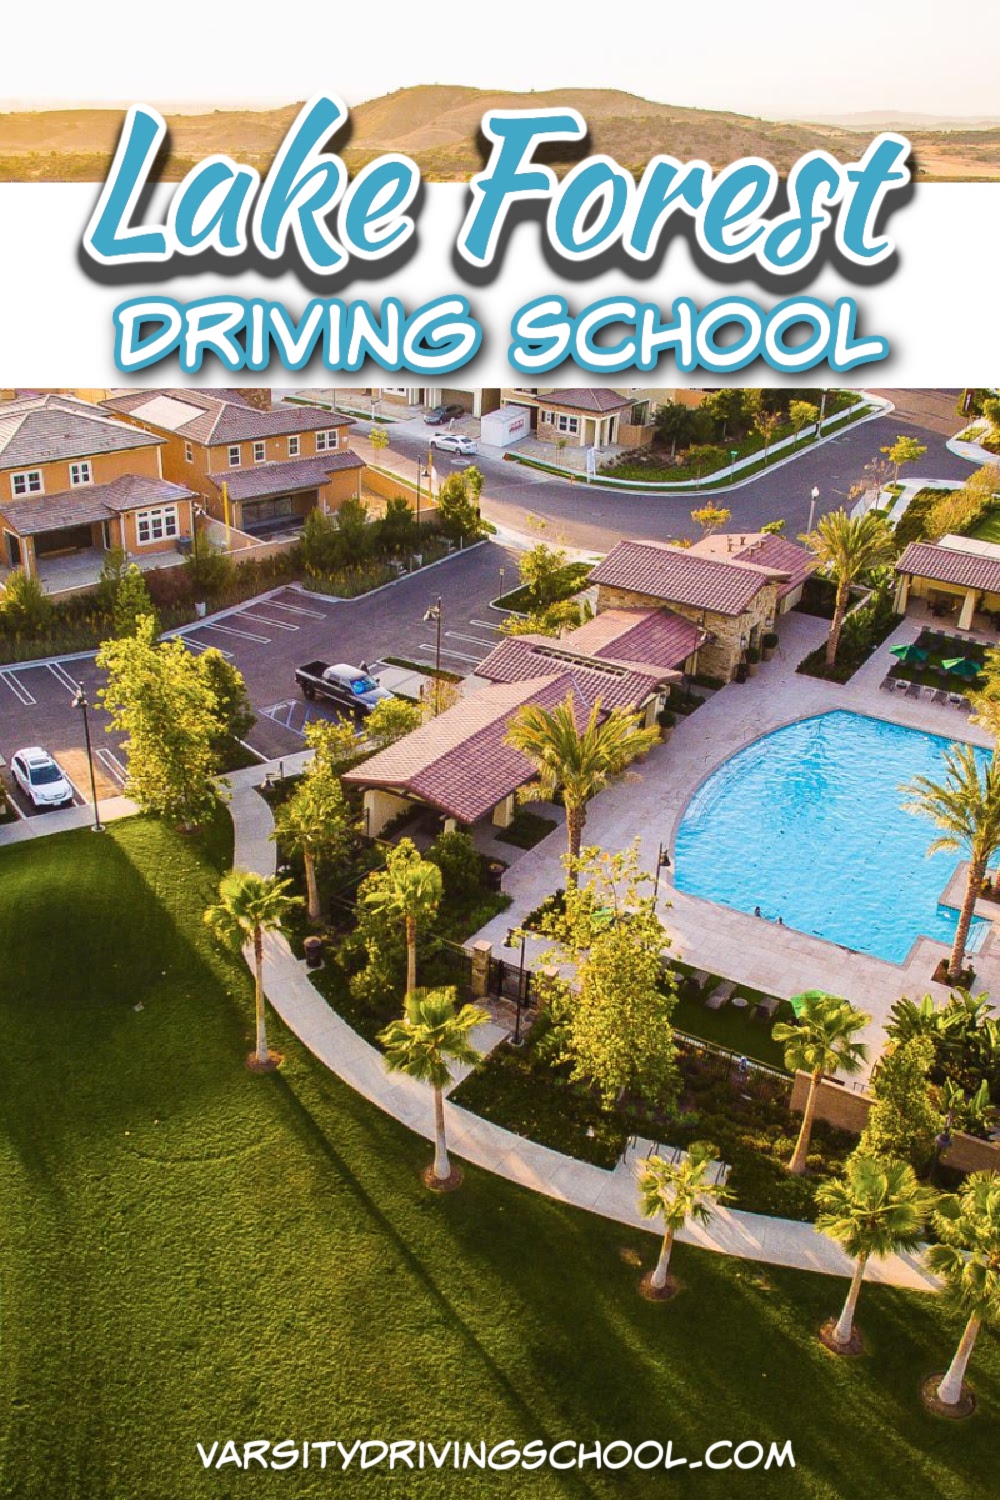 Varsity Driving School is the best Lake Forest driving school for teens and adults to learn how to drive safely and defensively.